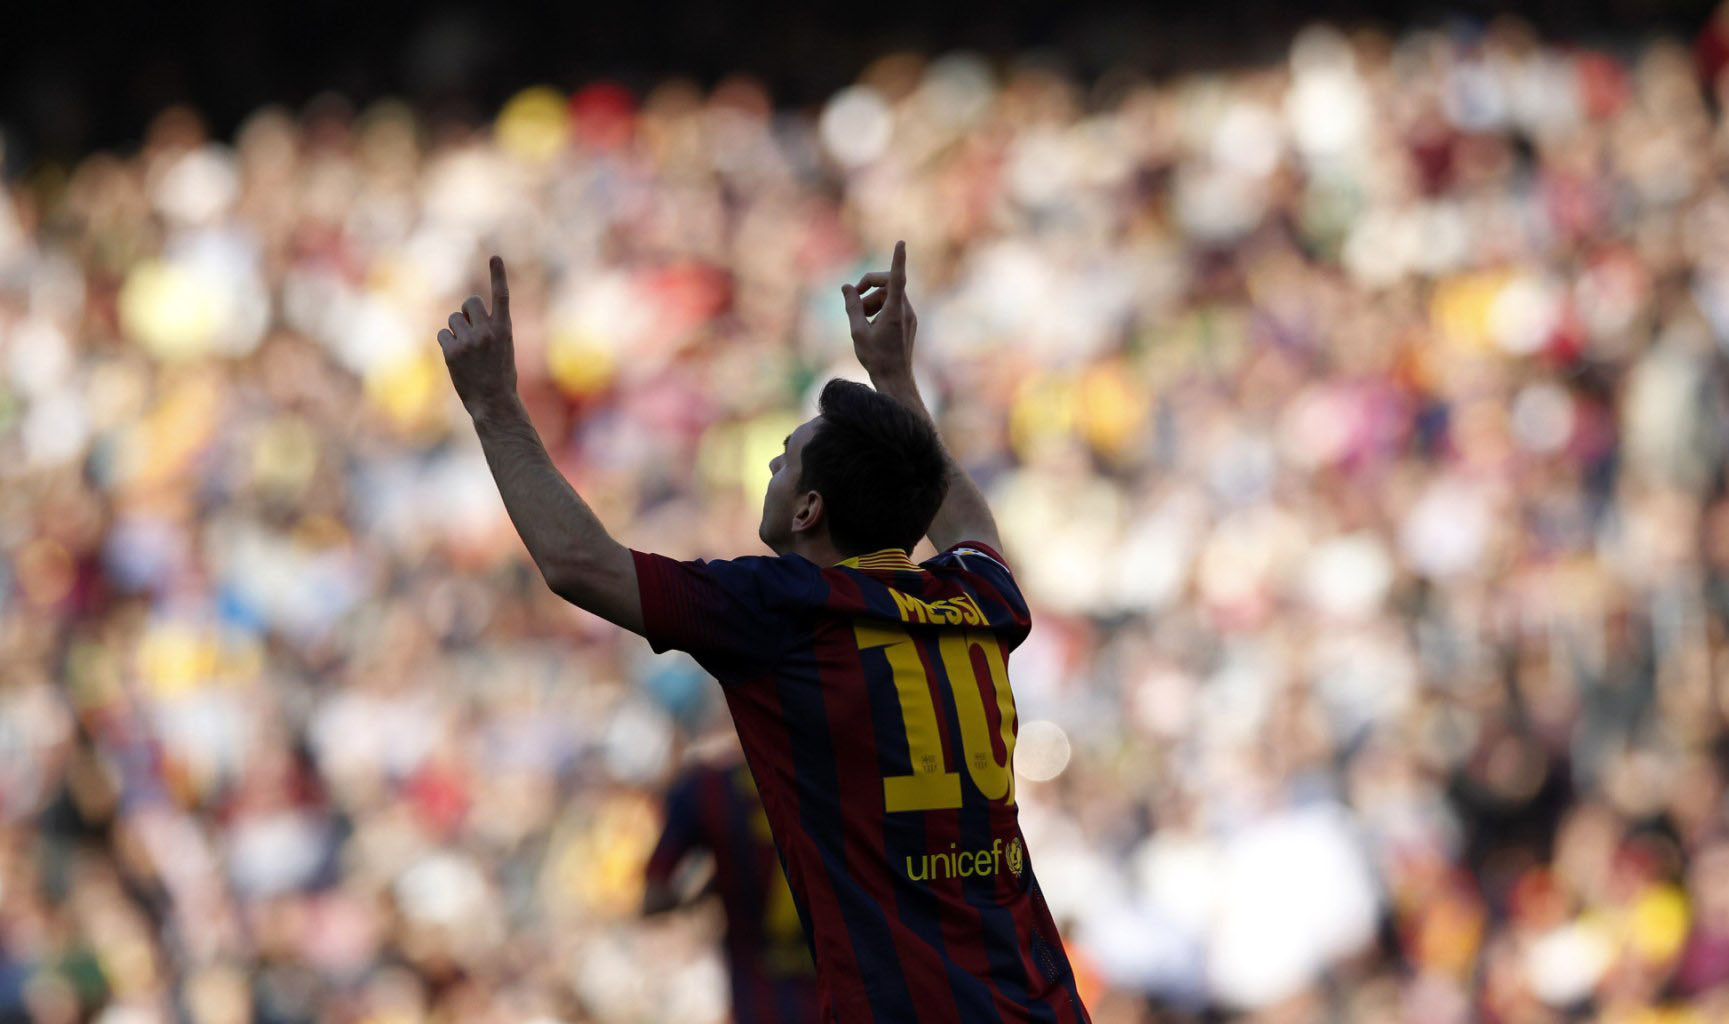 Messi sticking his two fingers in the air